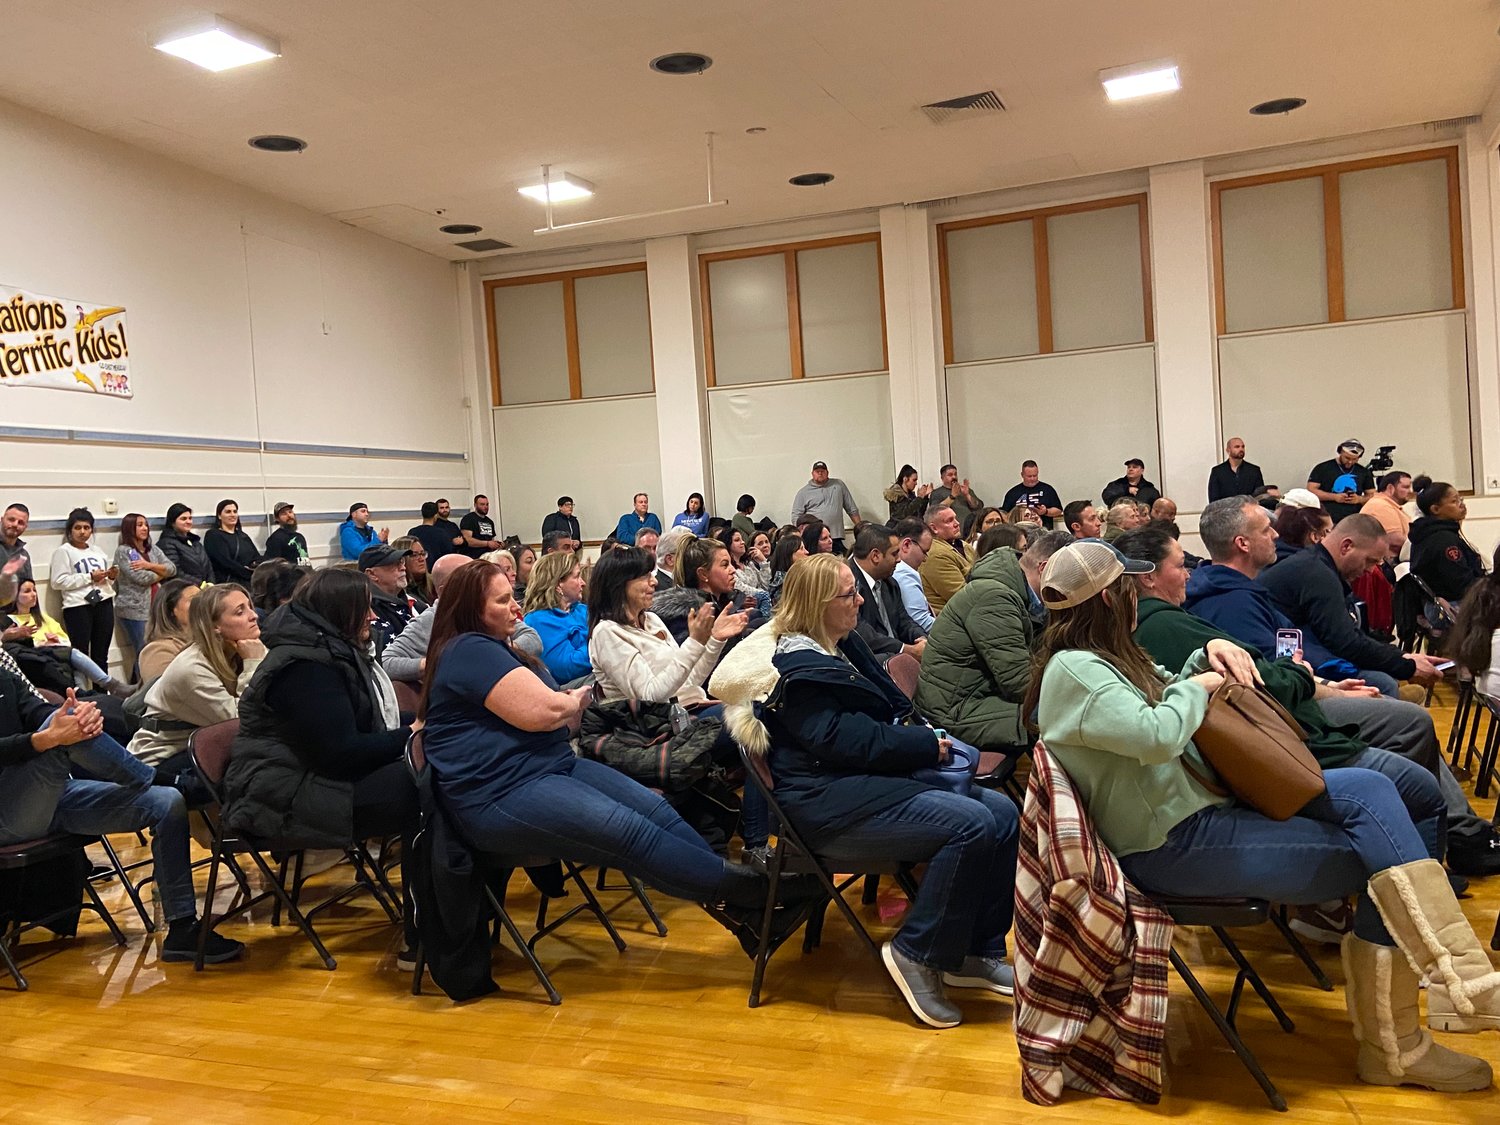 Roughly 100 people attended the March 8 Board of Education meeting to share their thoughts about an undercover video in which Assistant Superintendent David Casamento talks about how diversity, equity and inclusion are being taught covertly in school districts.